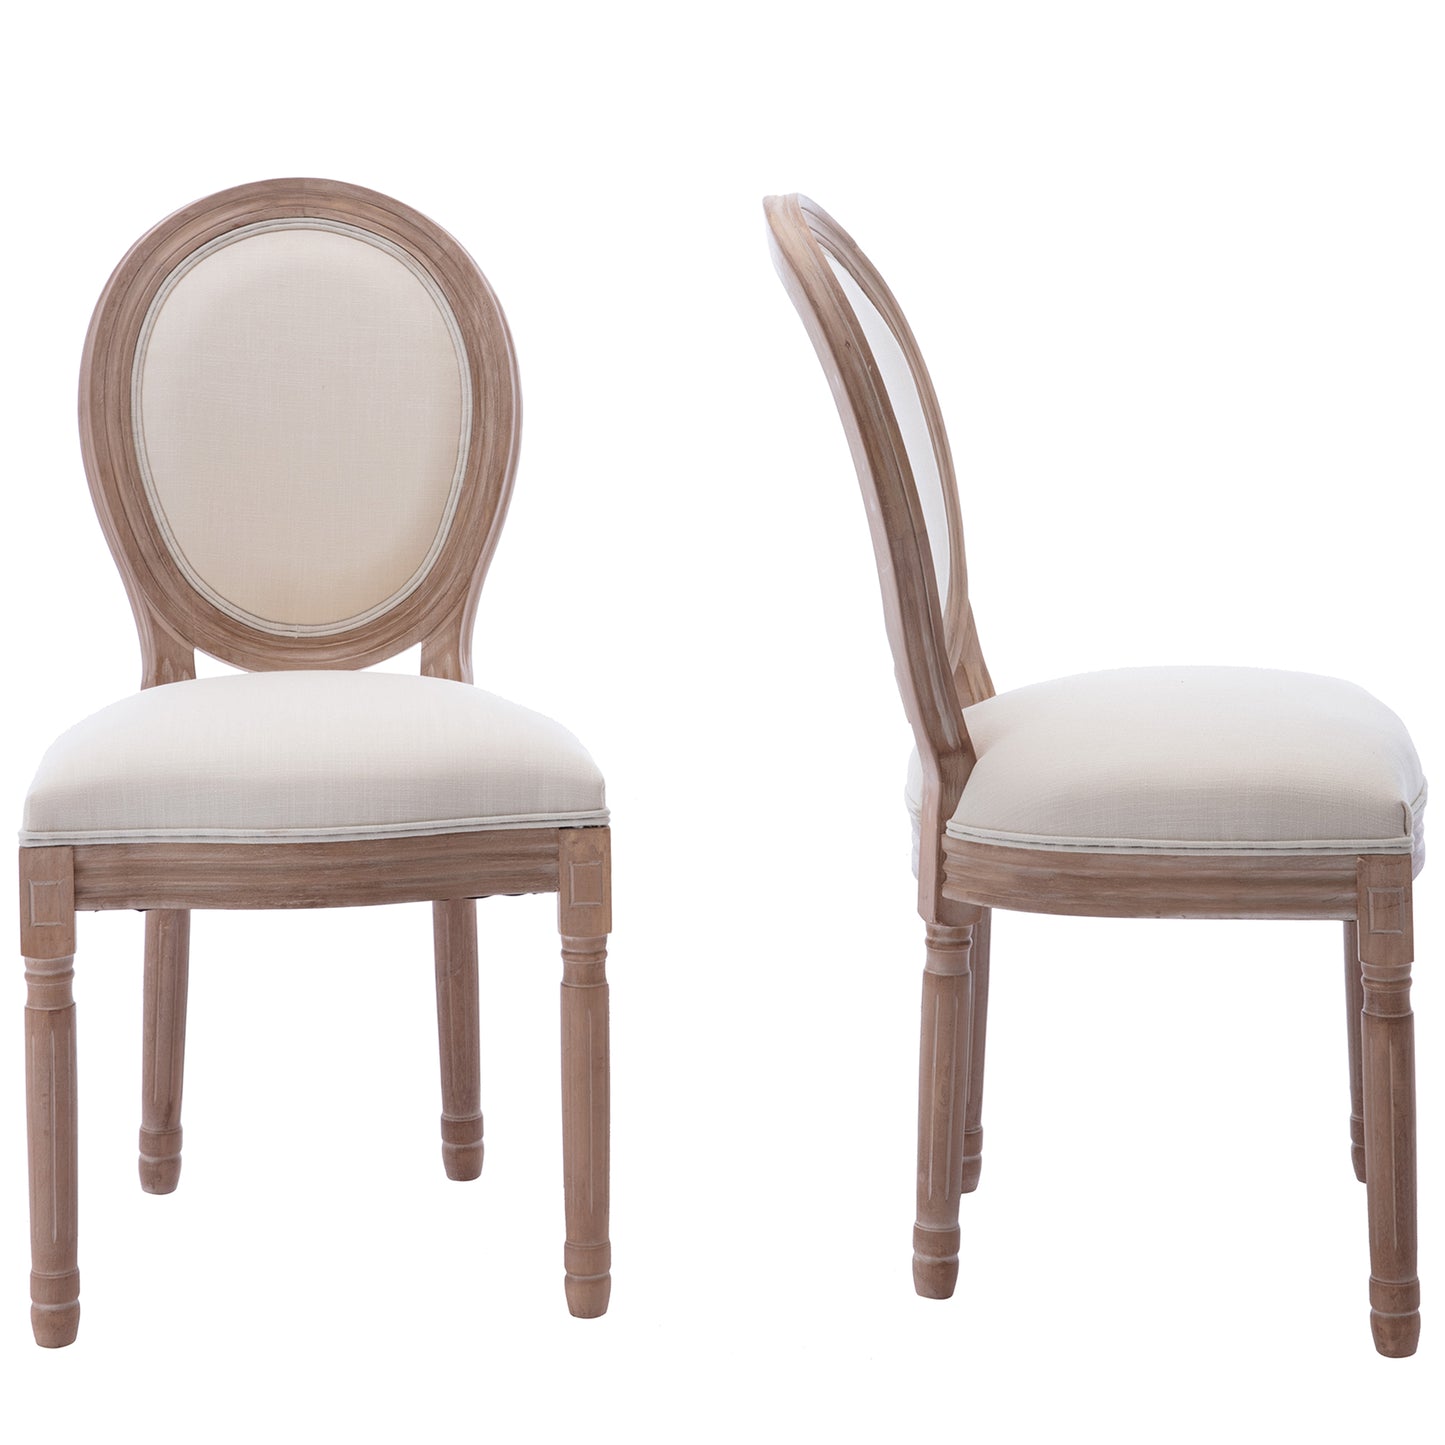 SYNGAR Upholstered Fabric Dining Chairs Set of 2, Solid Wood Modern French Kitchen Chairs, Beige